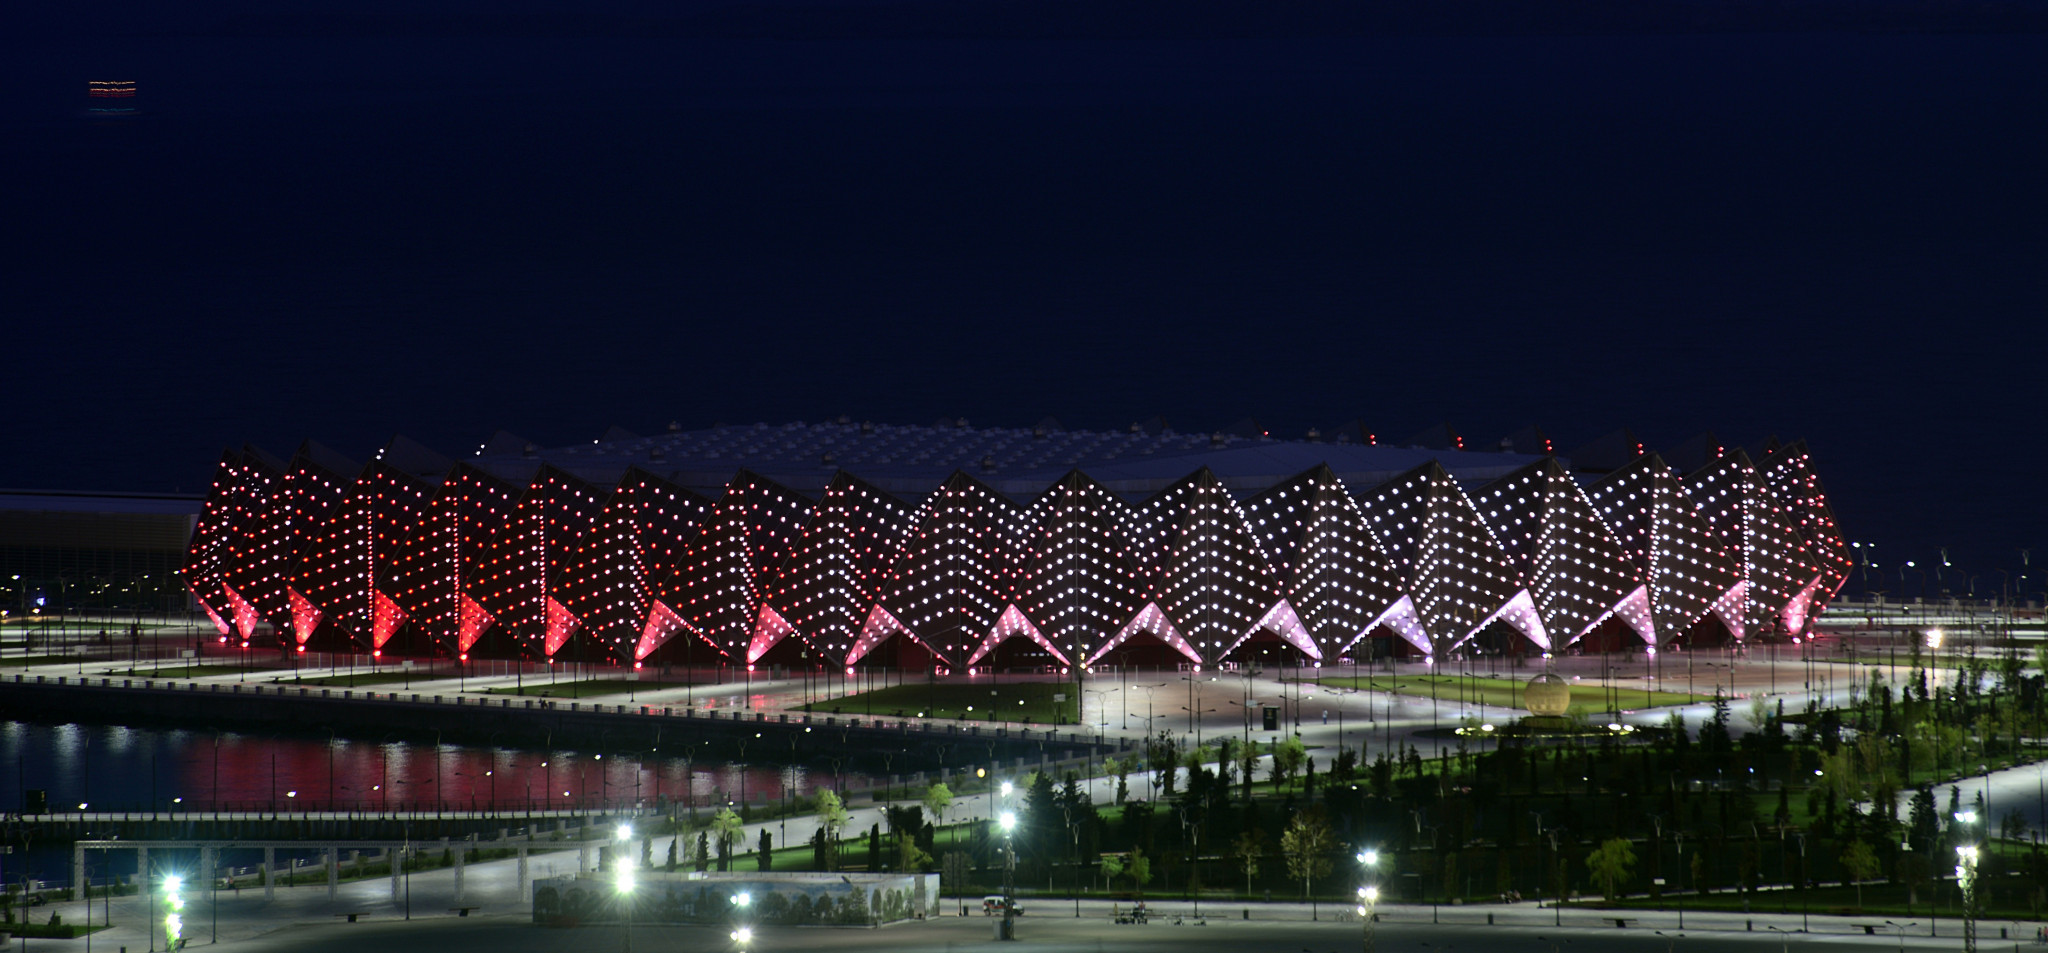 Baku Crystal Hall features a unique design ©Getty Images